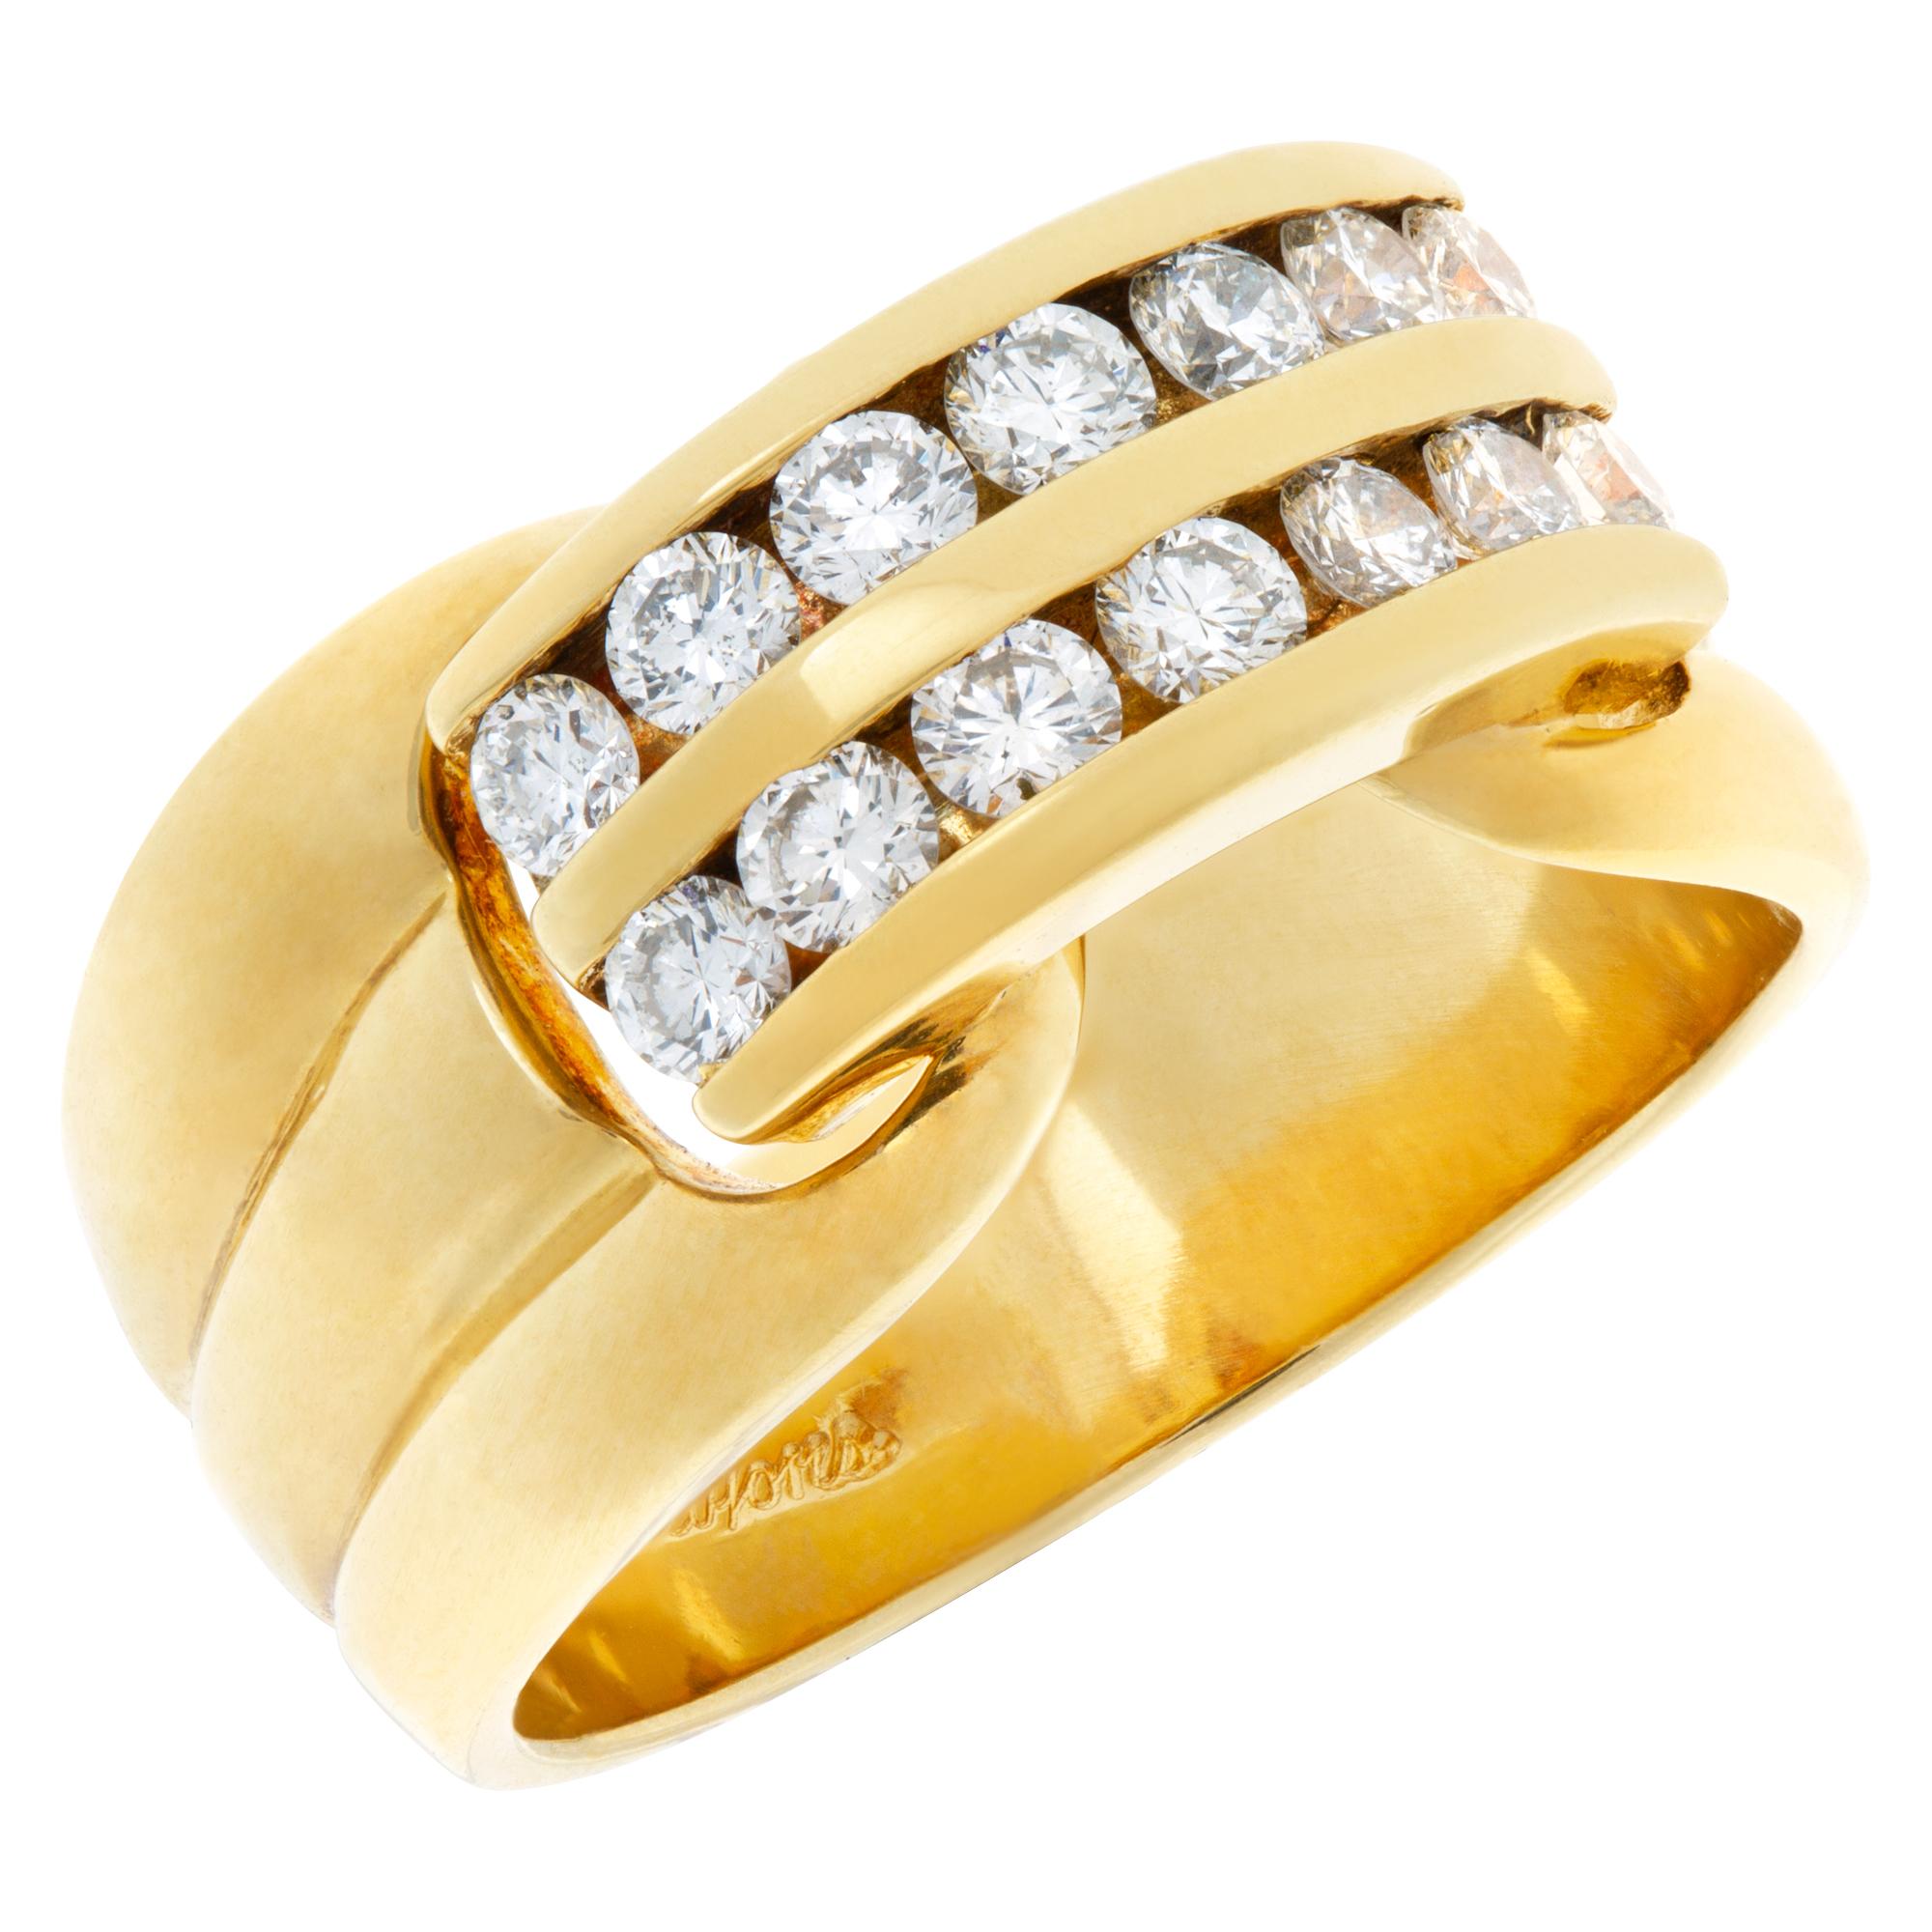 Women's Two Row Diamond Ring in 18k Yellow Gold. 0.40 Carats in Channel Set Diamonds For Sale